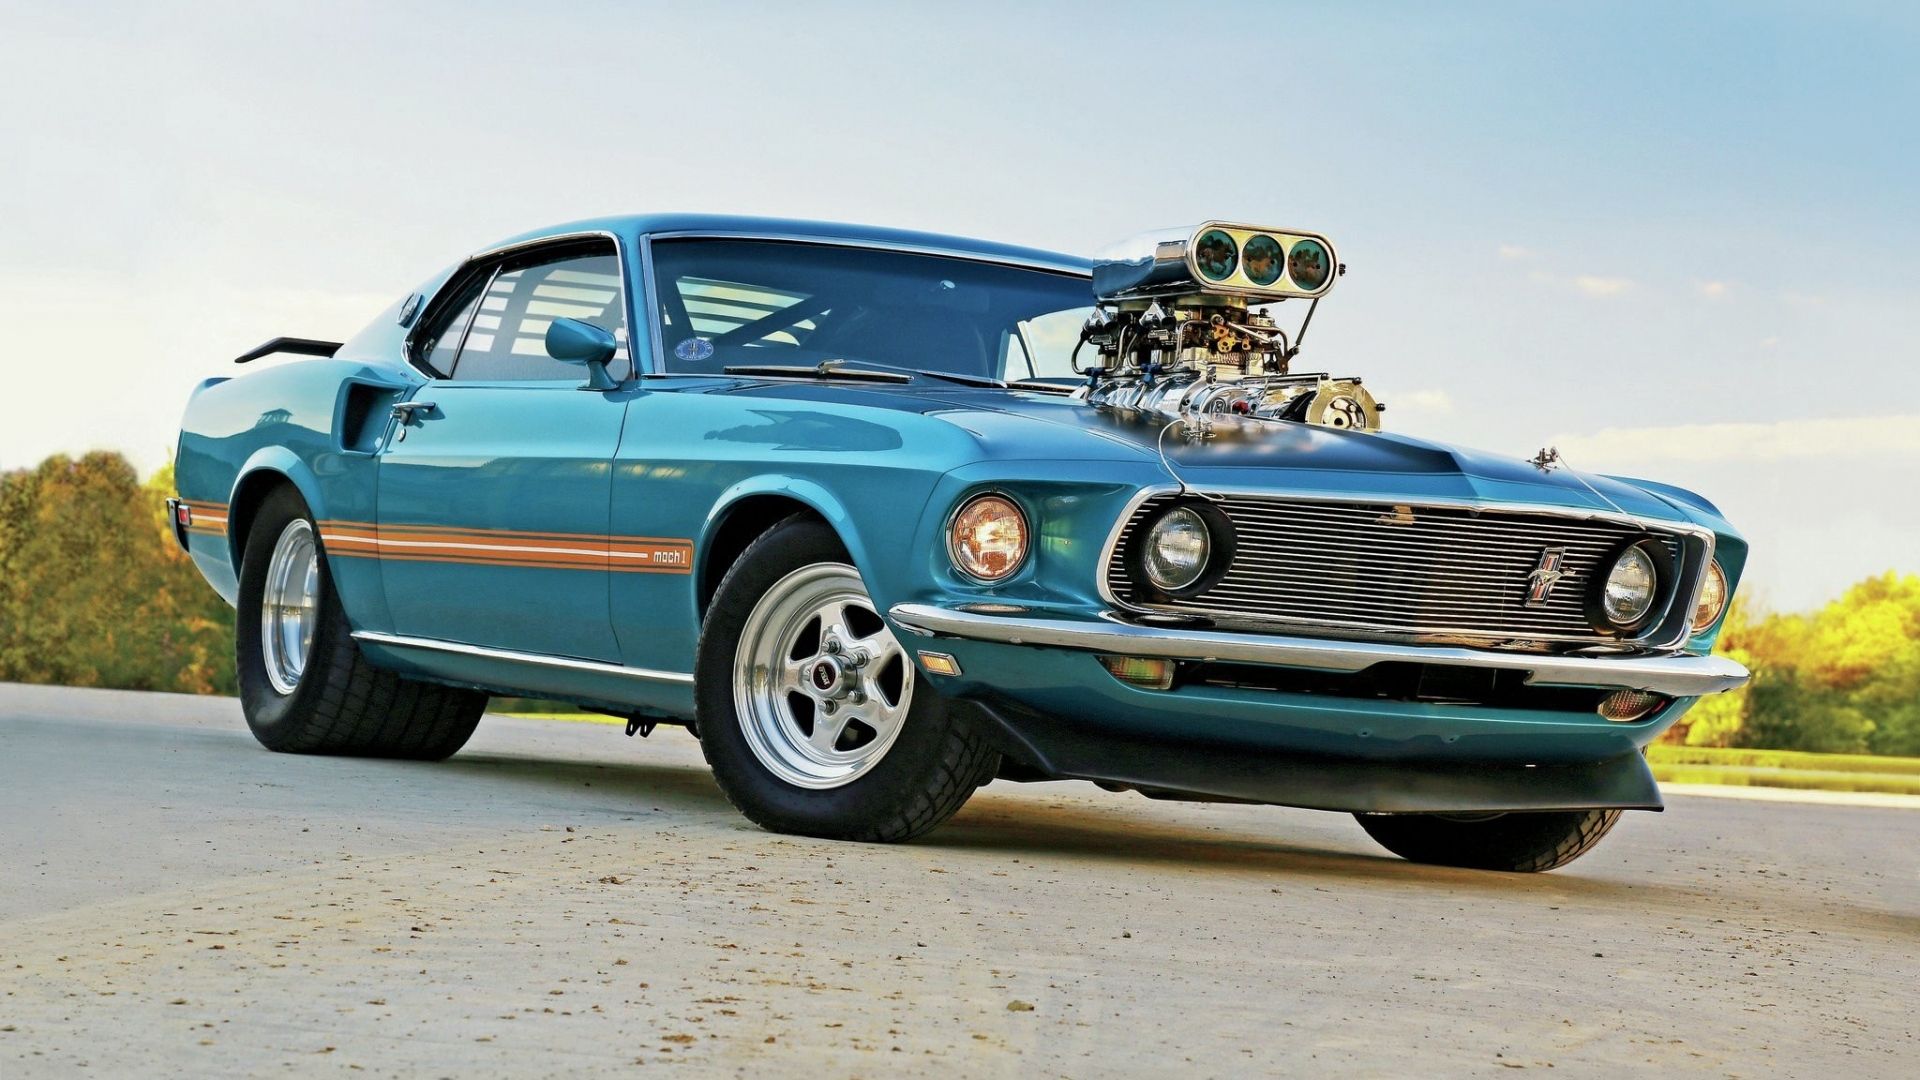 1969 Ford Mustang Mach 1 Hd Wallpaper Background Image 1920x1080